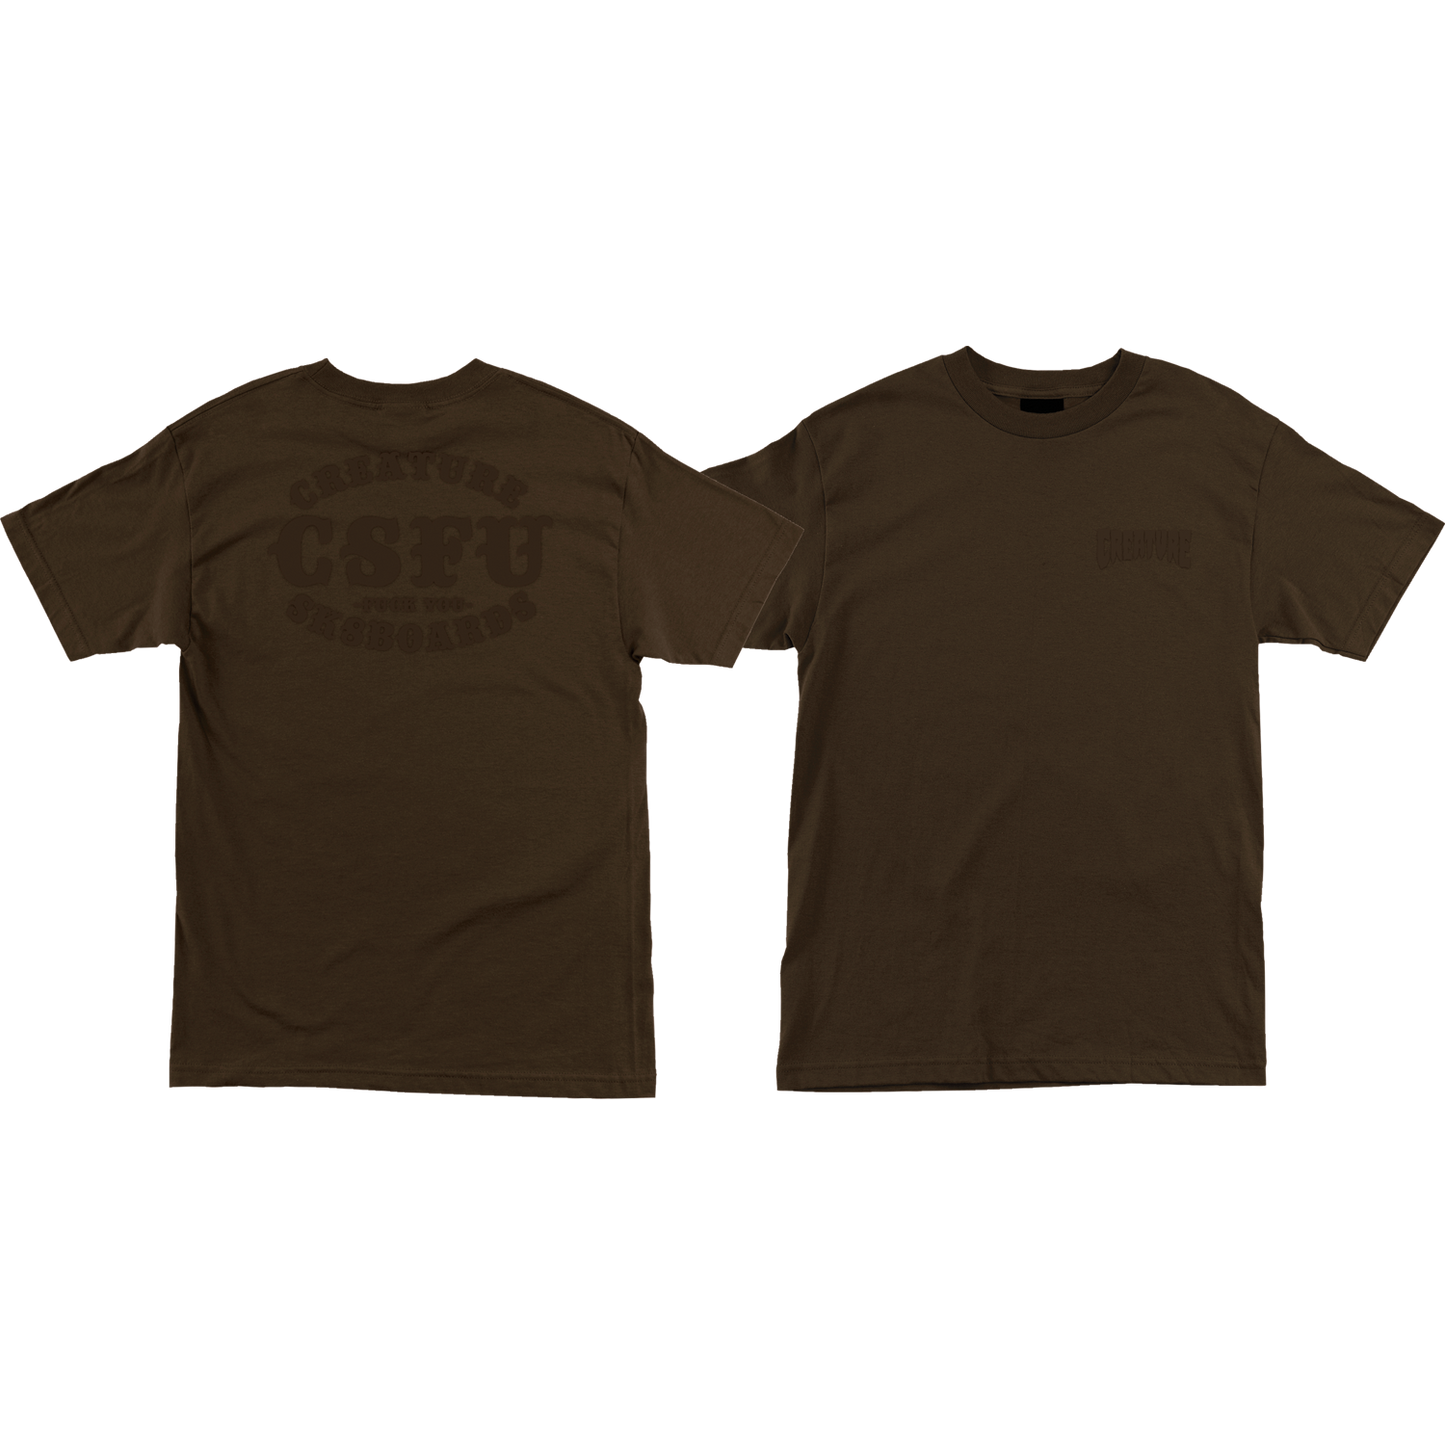 Creature Club Support T-Shirt - Size: SMALL Dark Chocolate